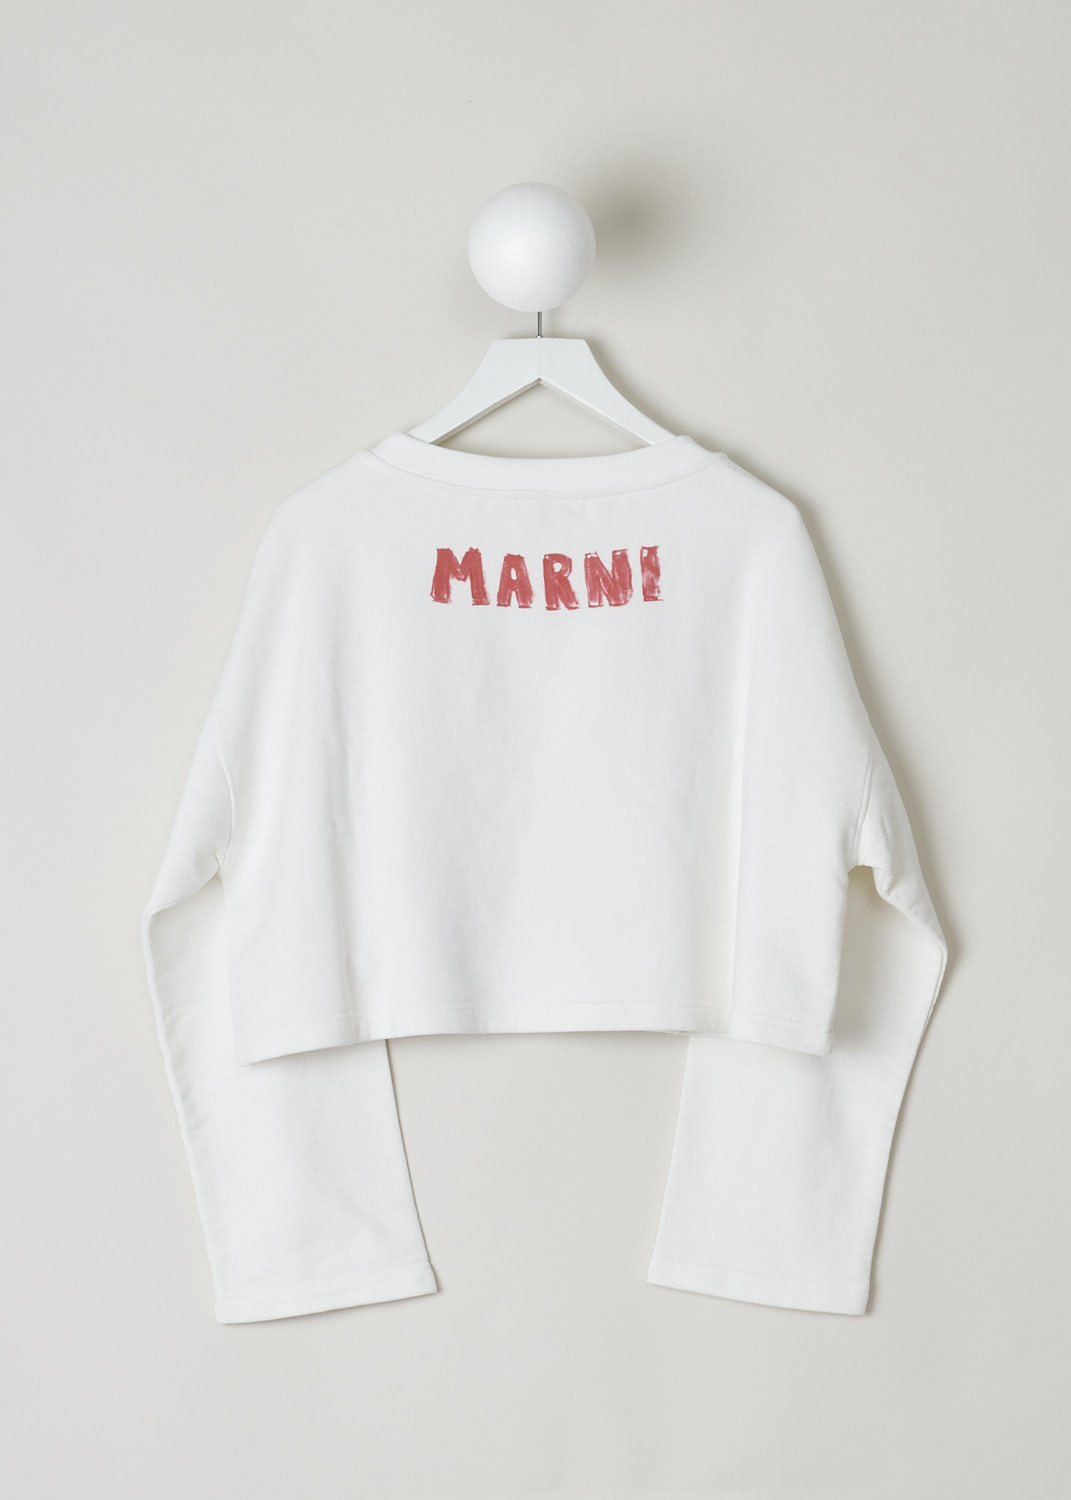 MARNI, CROPPED WHITE SWEATER WITH GRAPHIC PRINT, FLJE0174P1_USCU99_FBW03_STONE_WHITE, White, Print, Blue, Back, This long sleeve crewneck sweater has a graphic print on the front. The brand's lettering in printed in the back in red. The sweater has a cropped length. 
